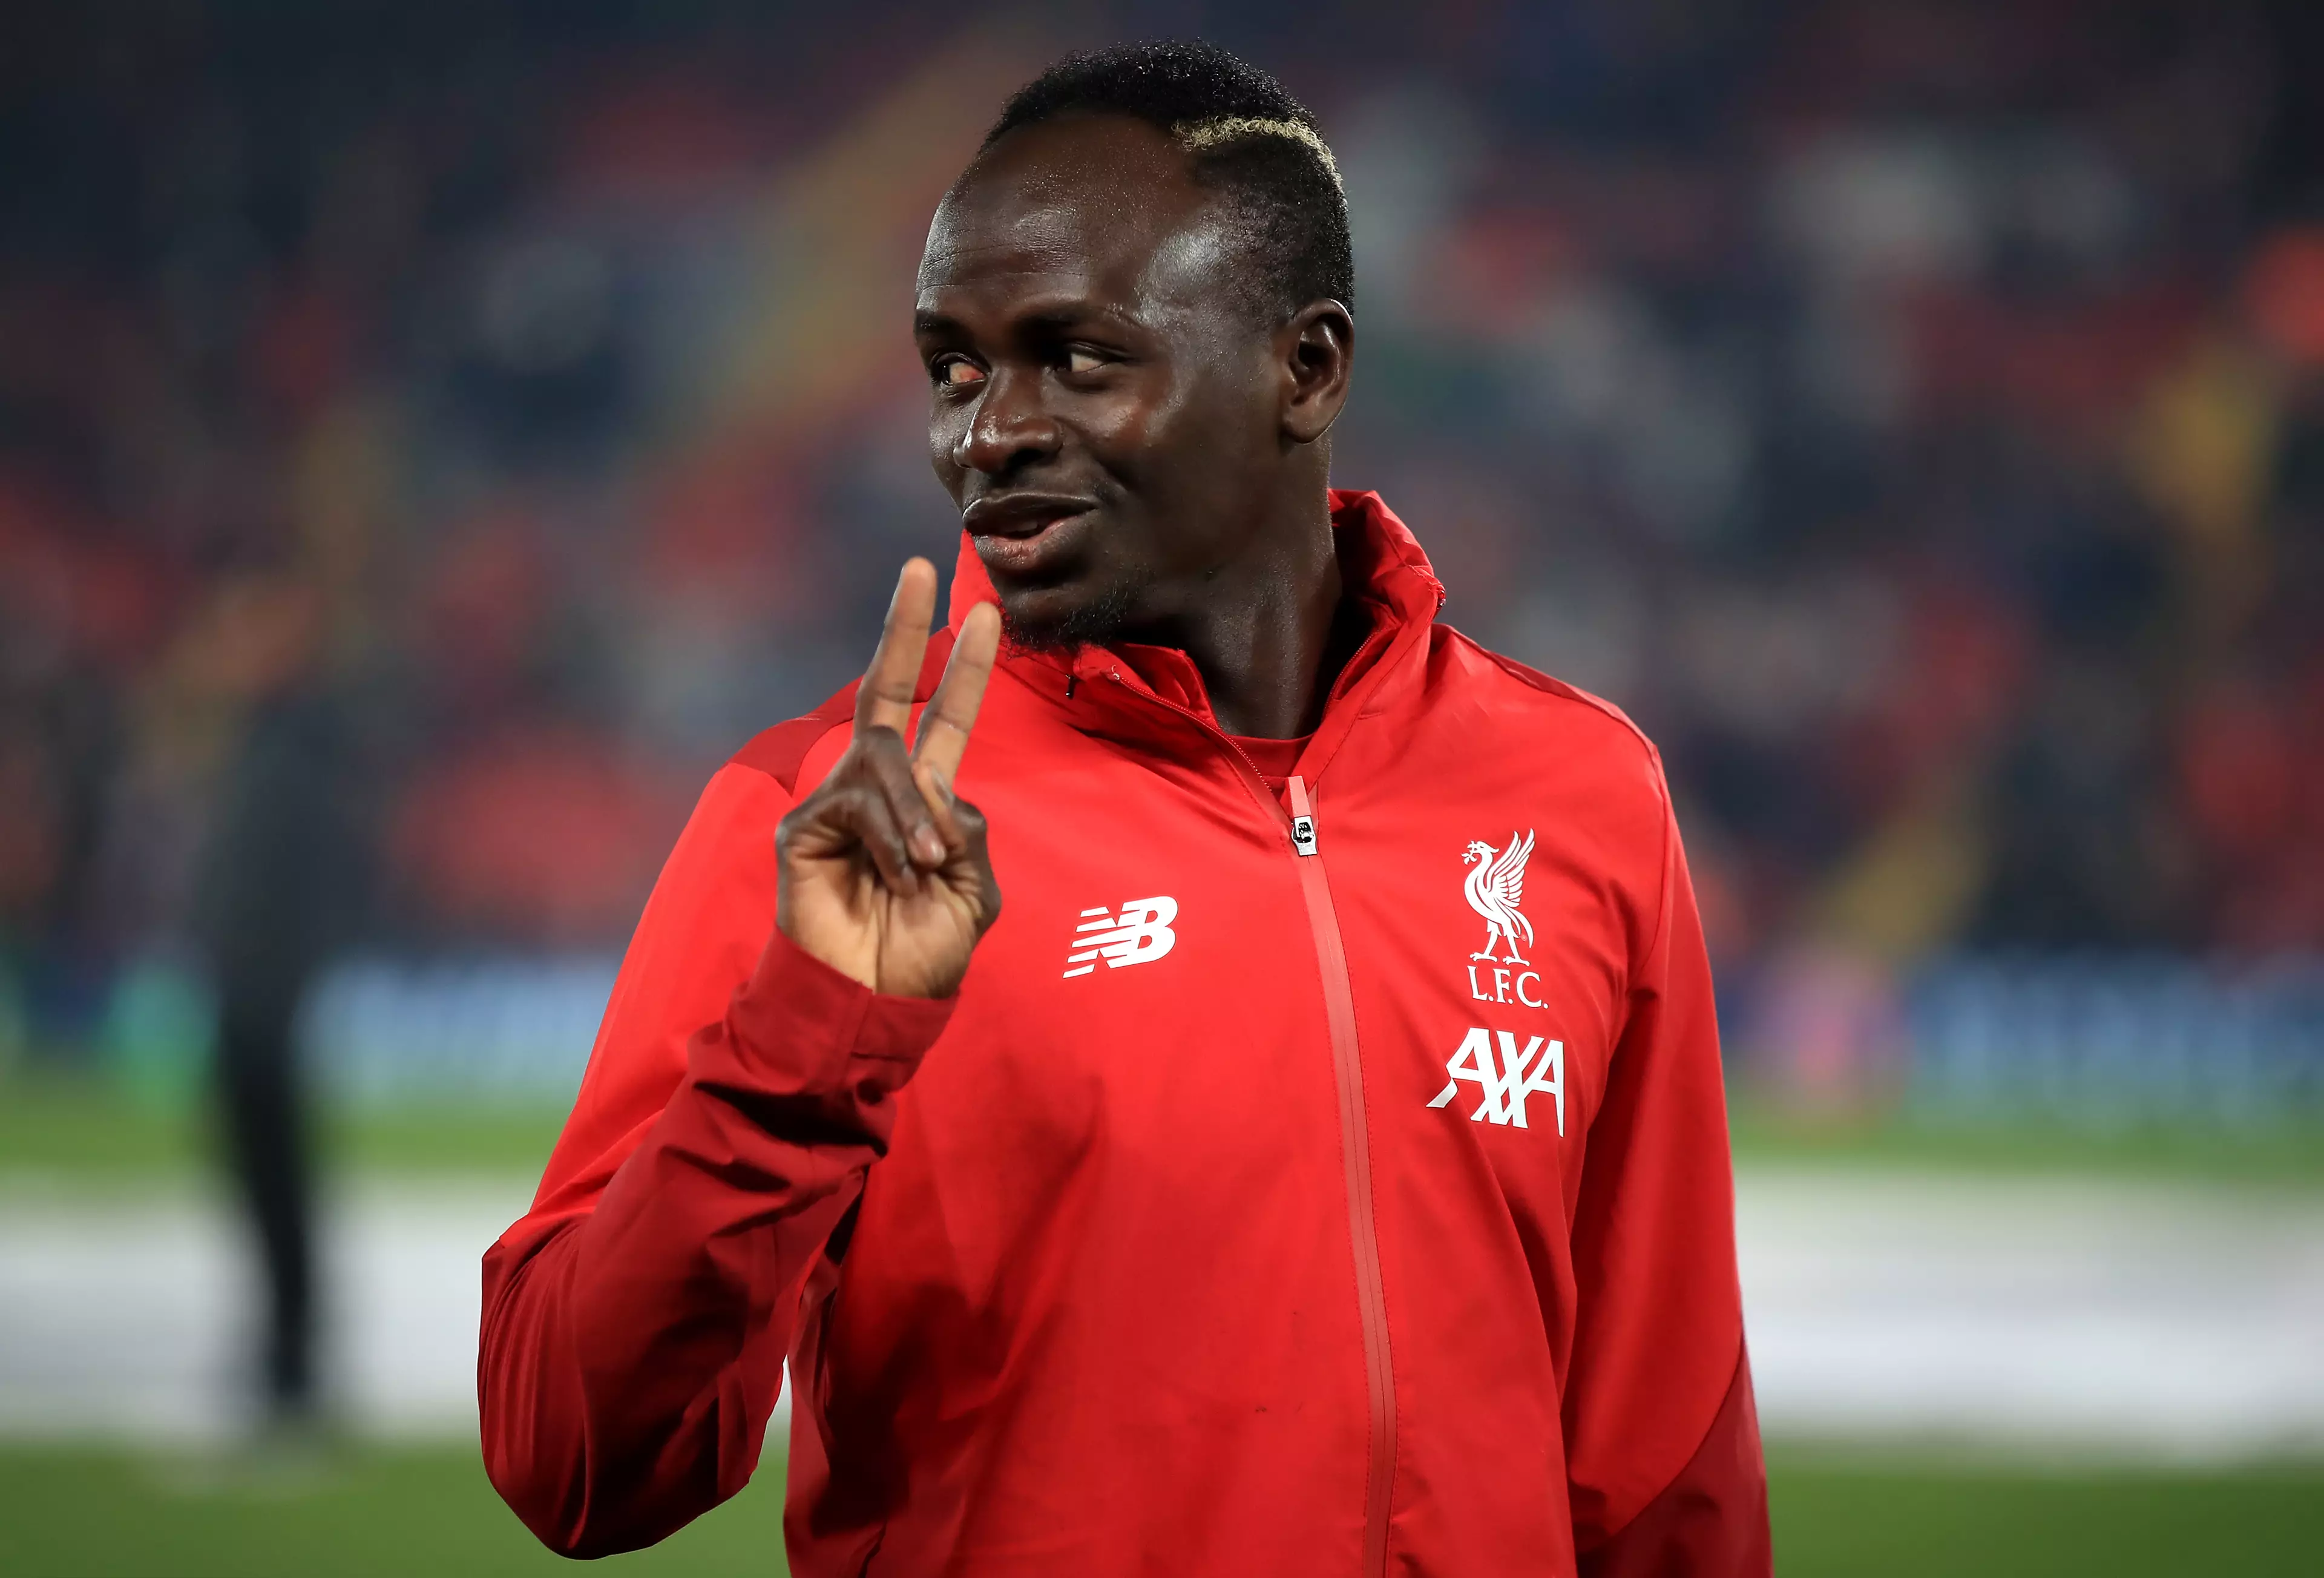 Sadio Mane hoping to get himself bumped up to second. Image: PA Images